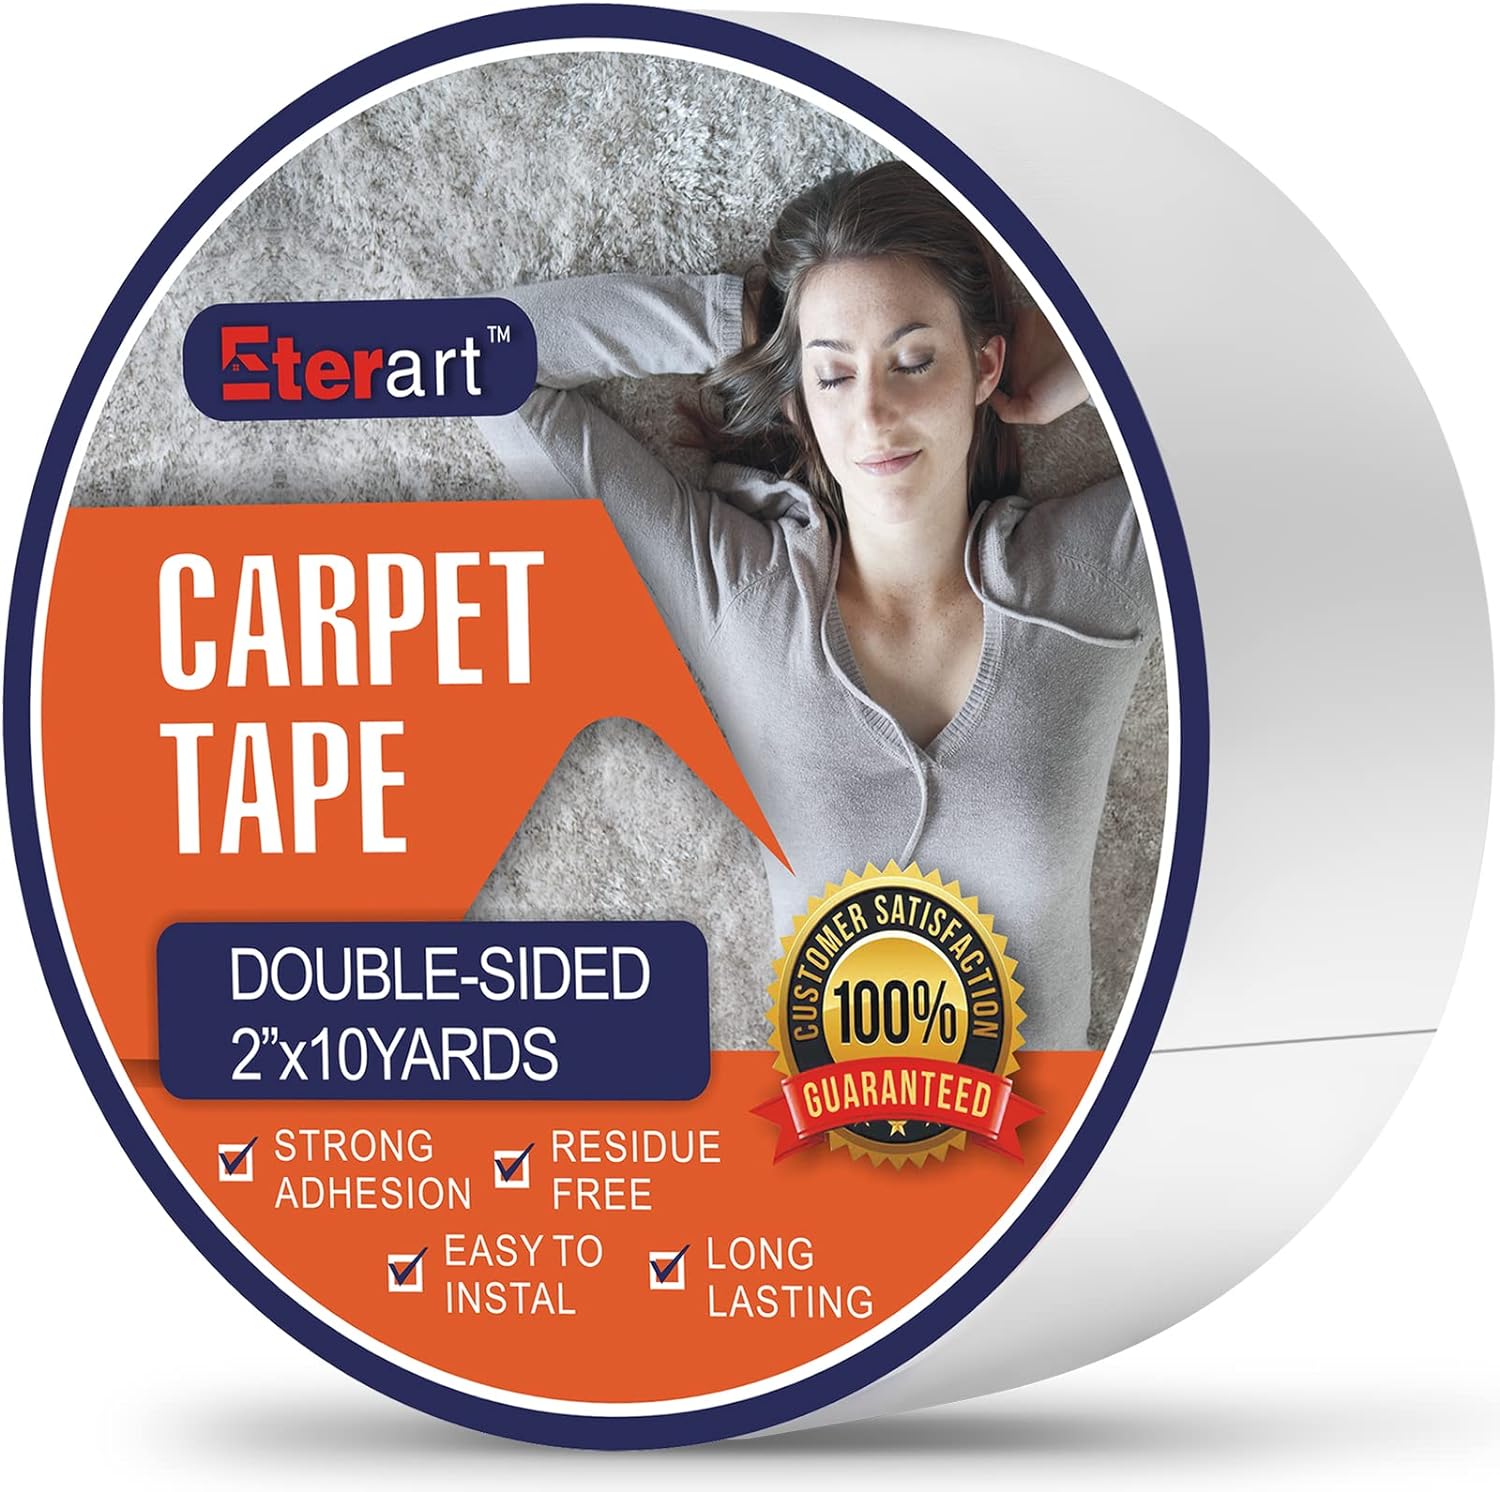 Shenzhenshi yuexiangruihua Kej ETERART Double Sided Carpet Tape Heavy Duty for Area Rugs,Tile Hardwood Floors,Over Carpet,Rug Tape High Adhesive and